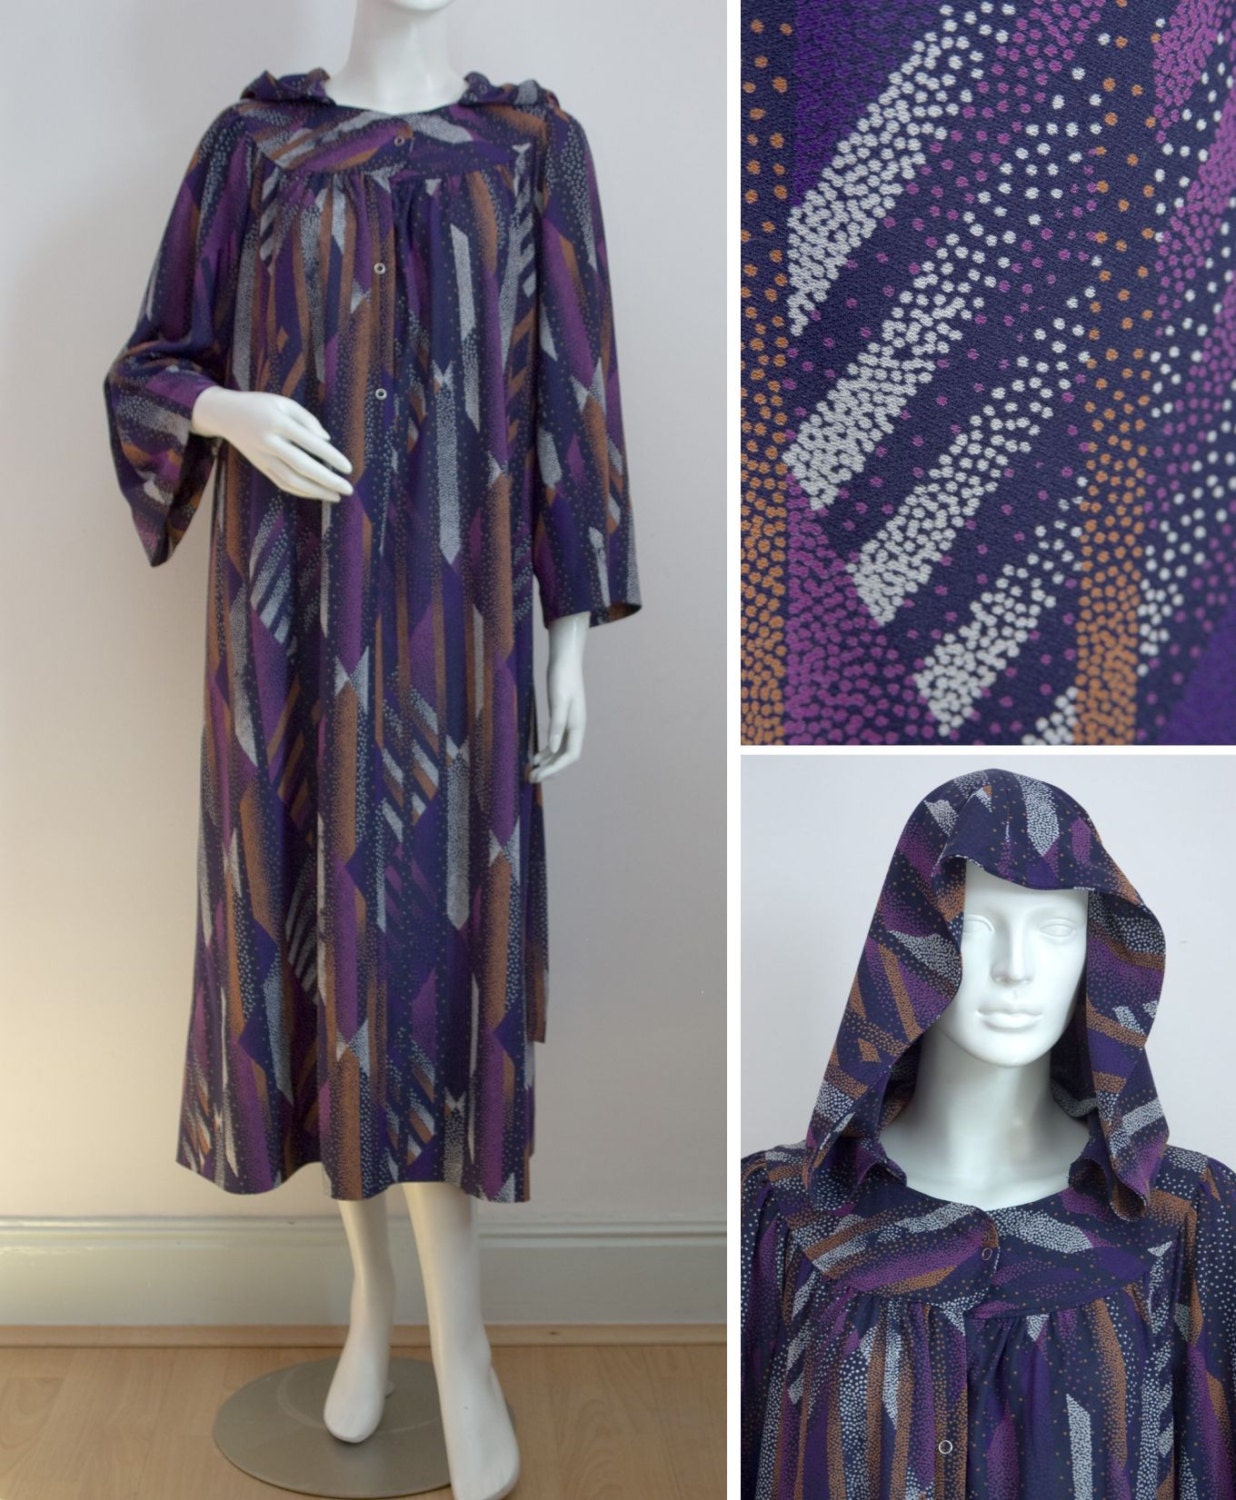 Vintage 70s Lounge Dress Purple Abstract Print Hooded Dressing Gown Lounge Wear Size Medium 1970s - catwalkcreative